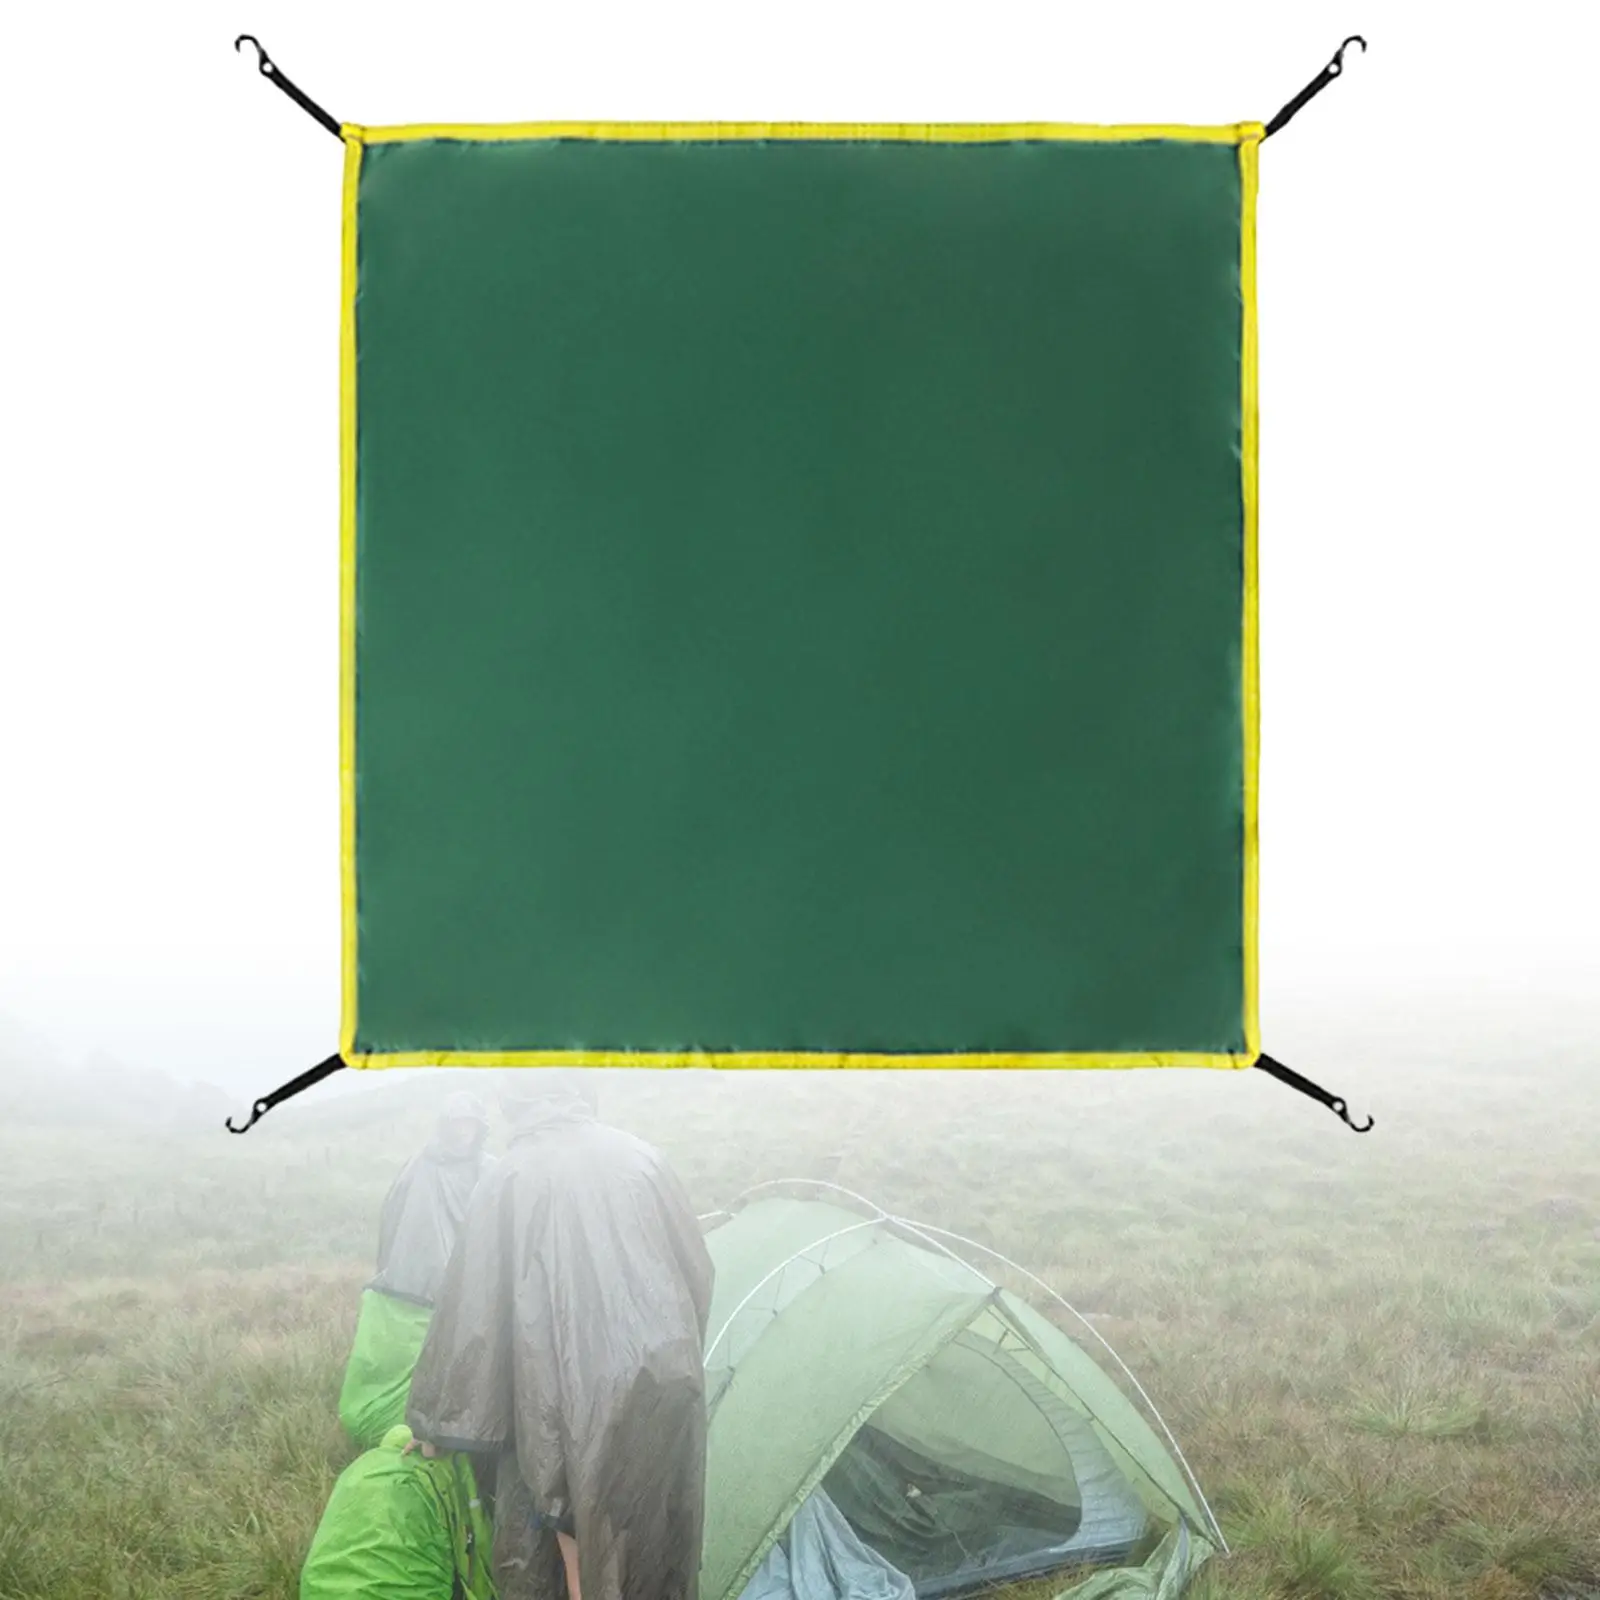 Rainfly Sun Protection Portable Rainproof Waterproof Tent Top Cover Tarp for Hiking Camping Backpacking Travel Outdoor Supplies